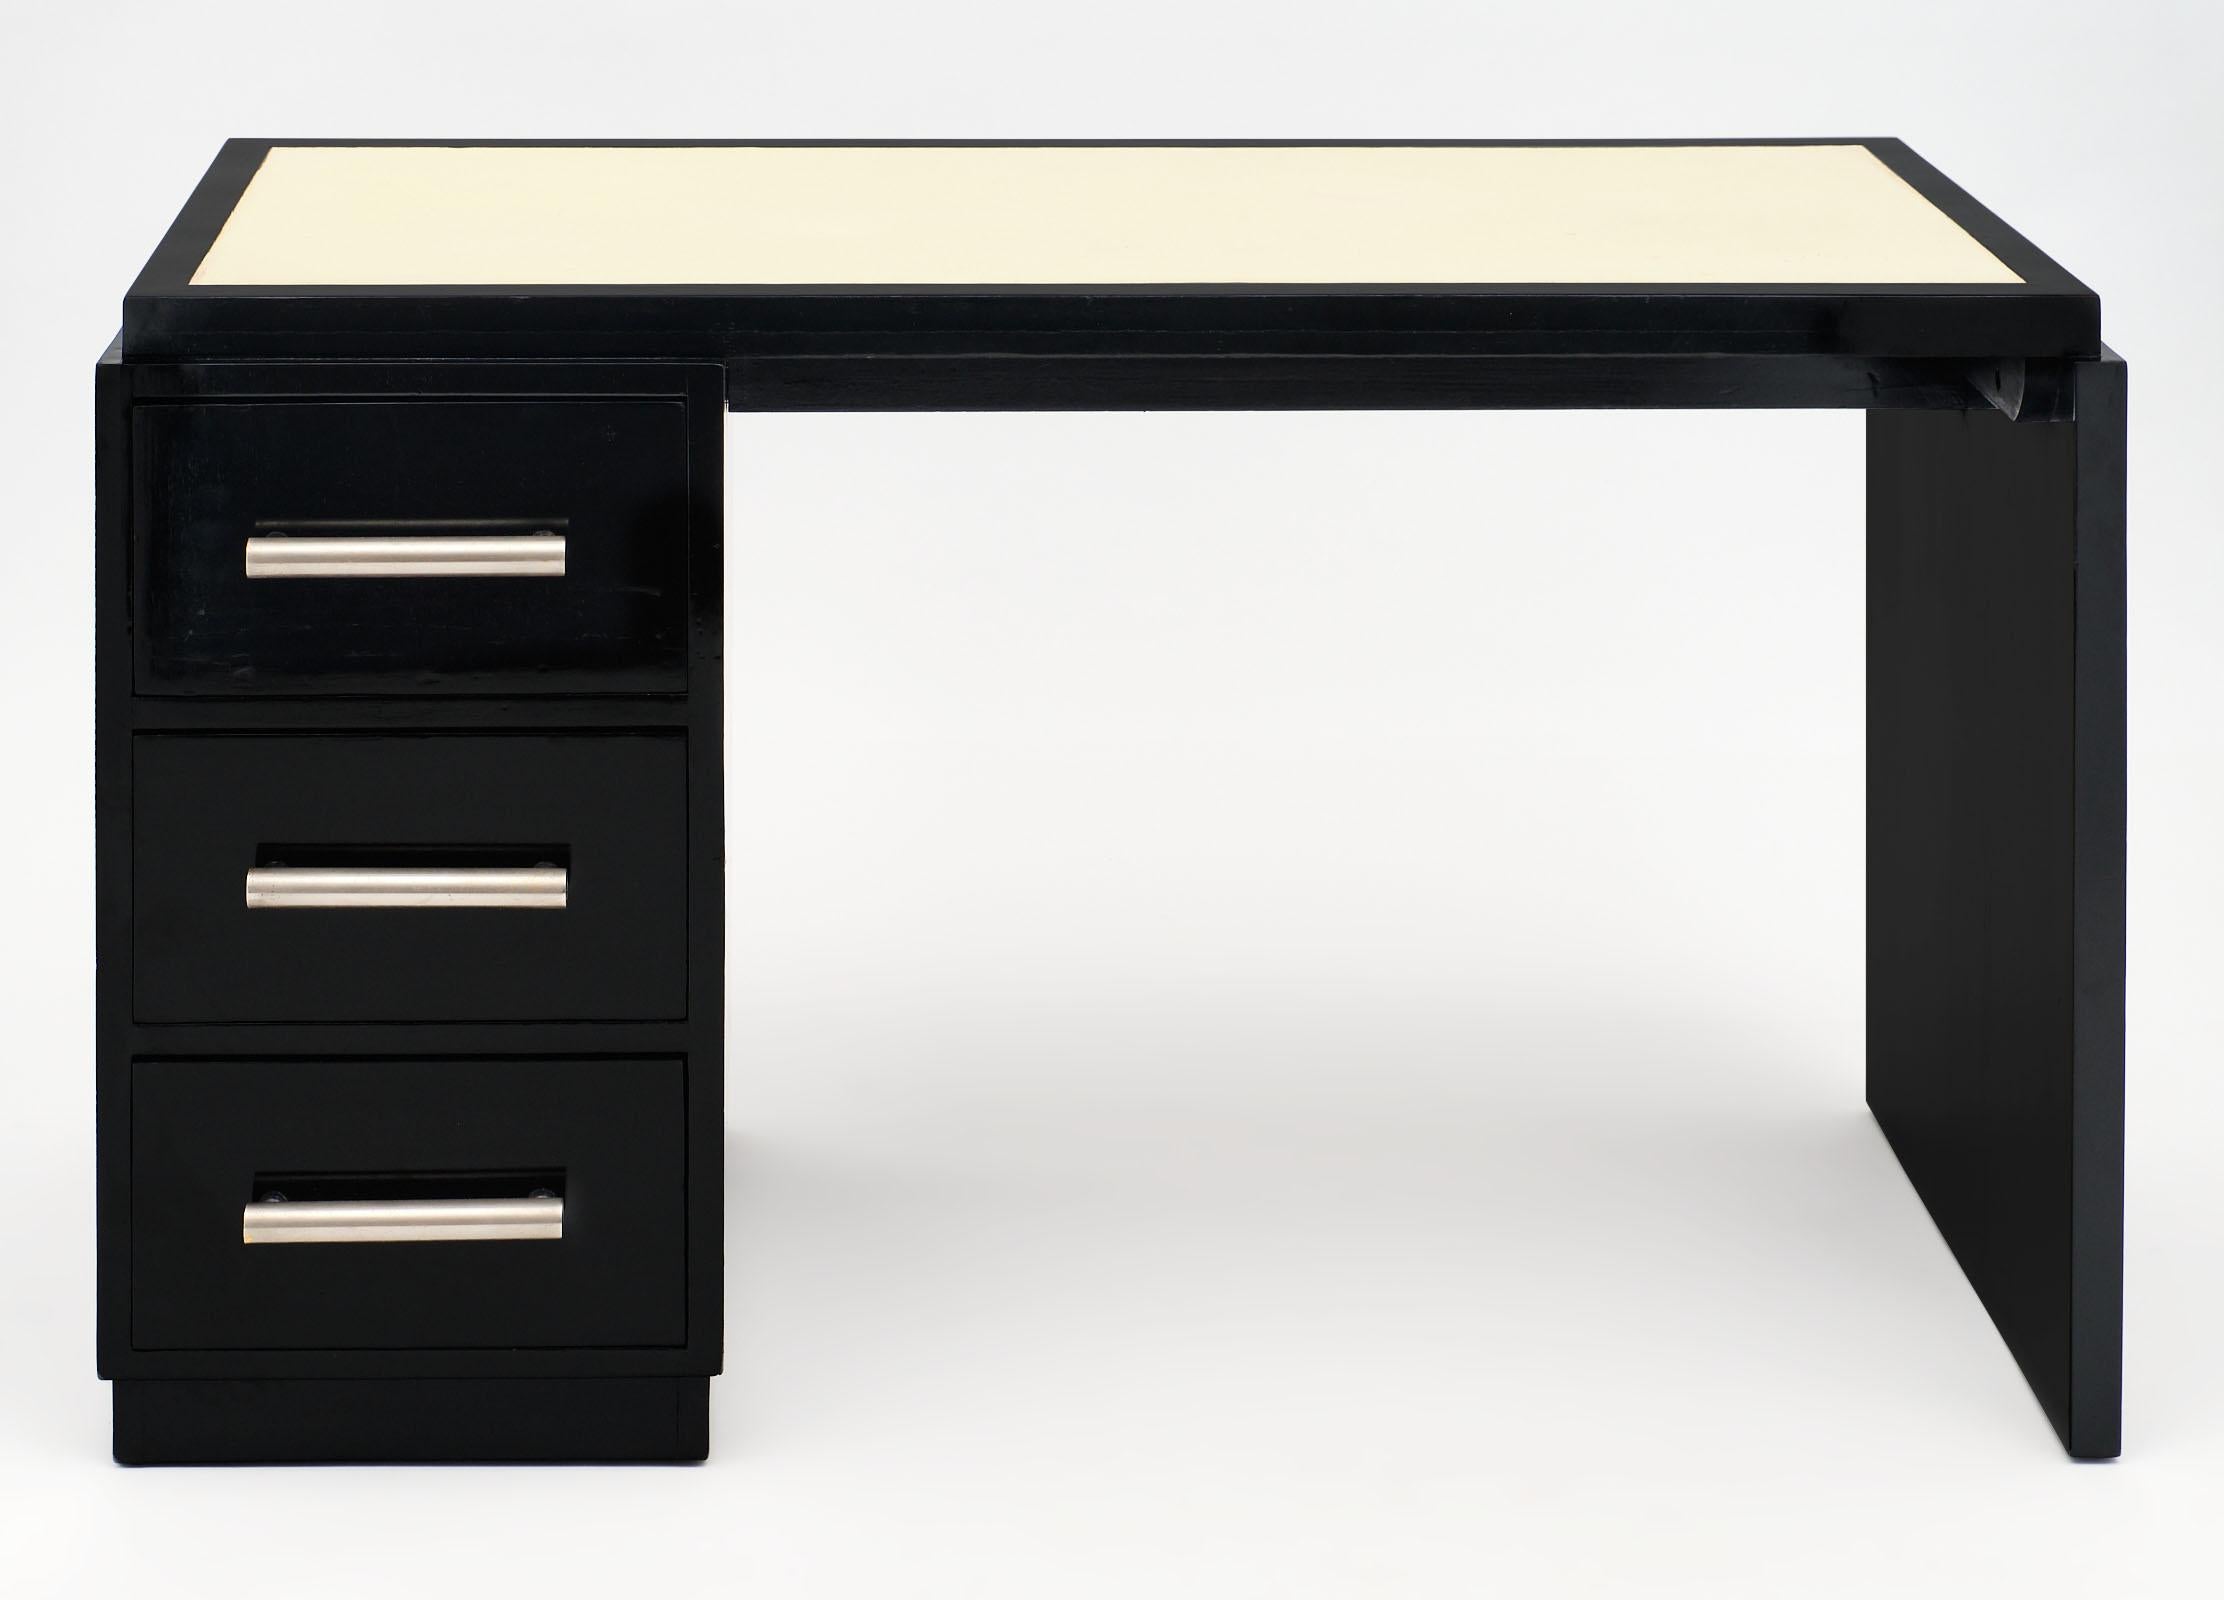 French Art Deco period ebonized desk with great lines and three dovetailed drawers with original pulls. The top has a cream leather writing surface. We love the ebonized oak and impressive impact of this piece.